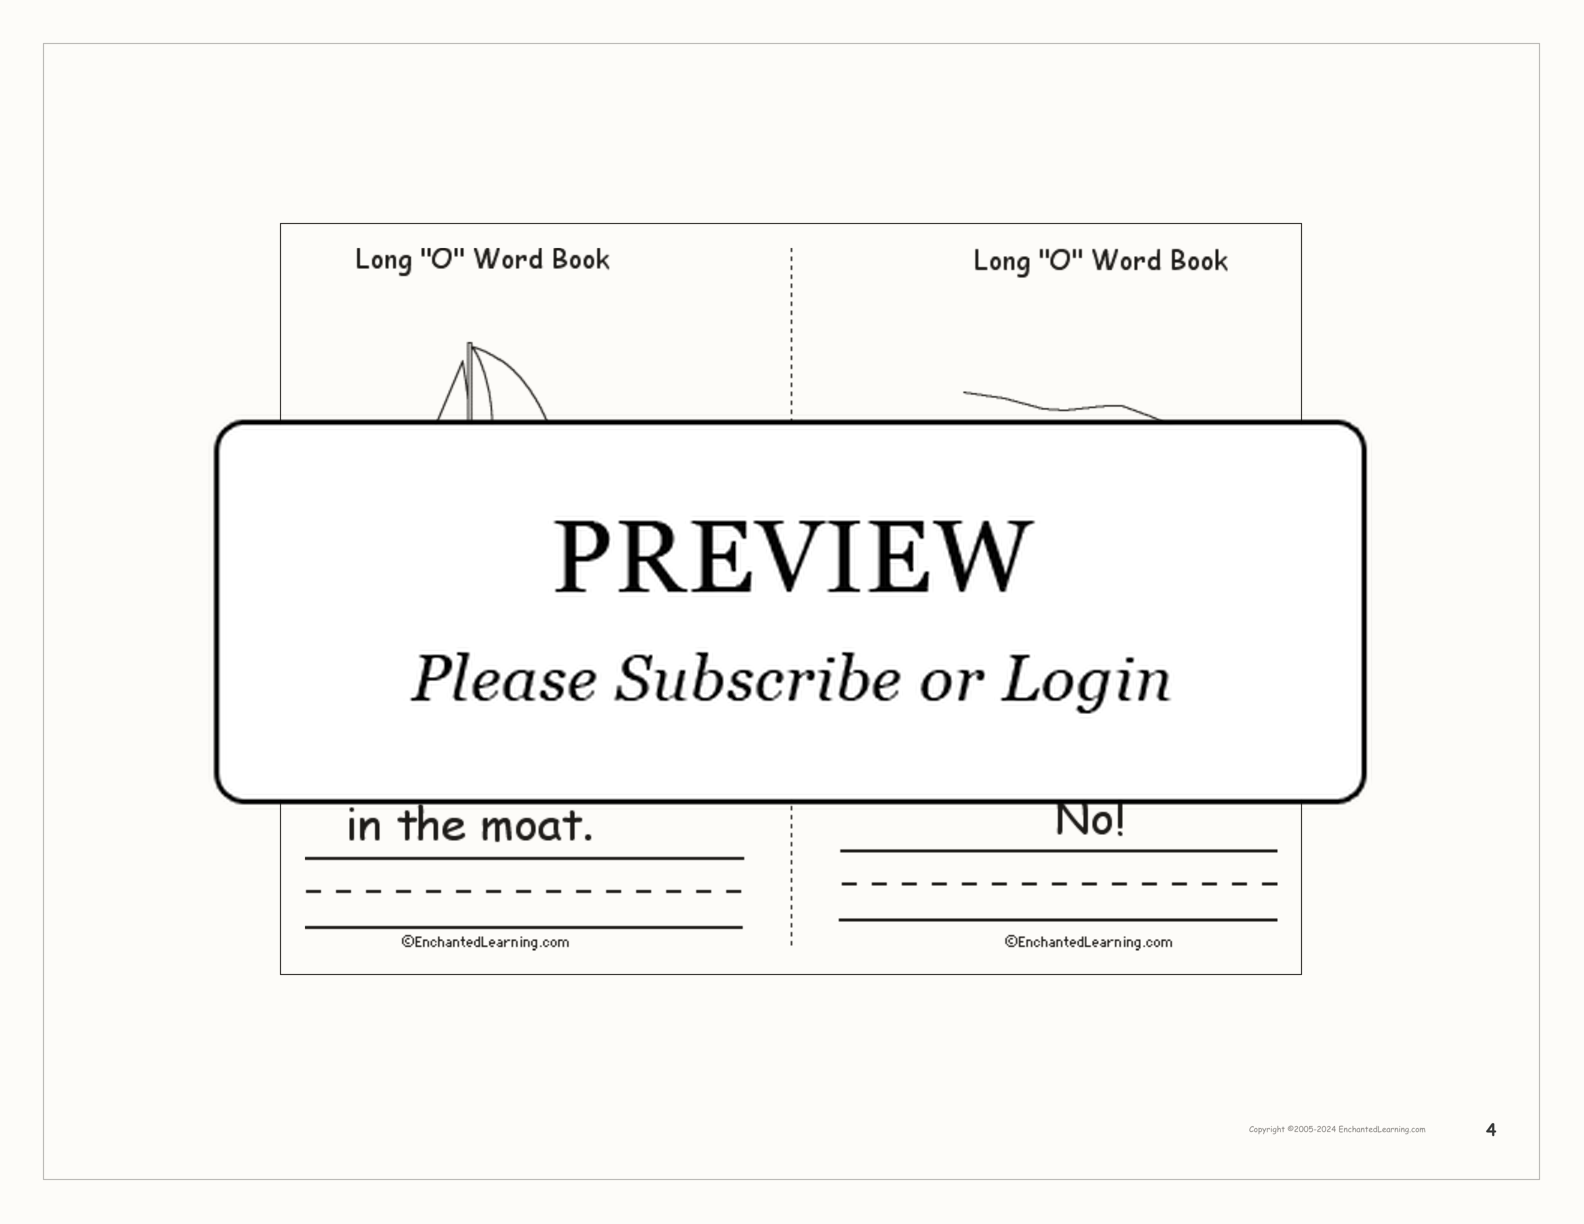 Long 'O' Words Book interactive printout page 4